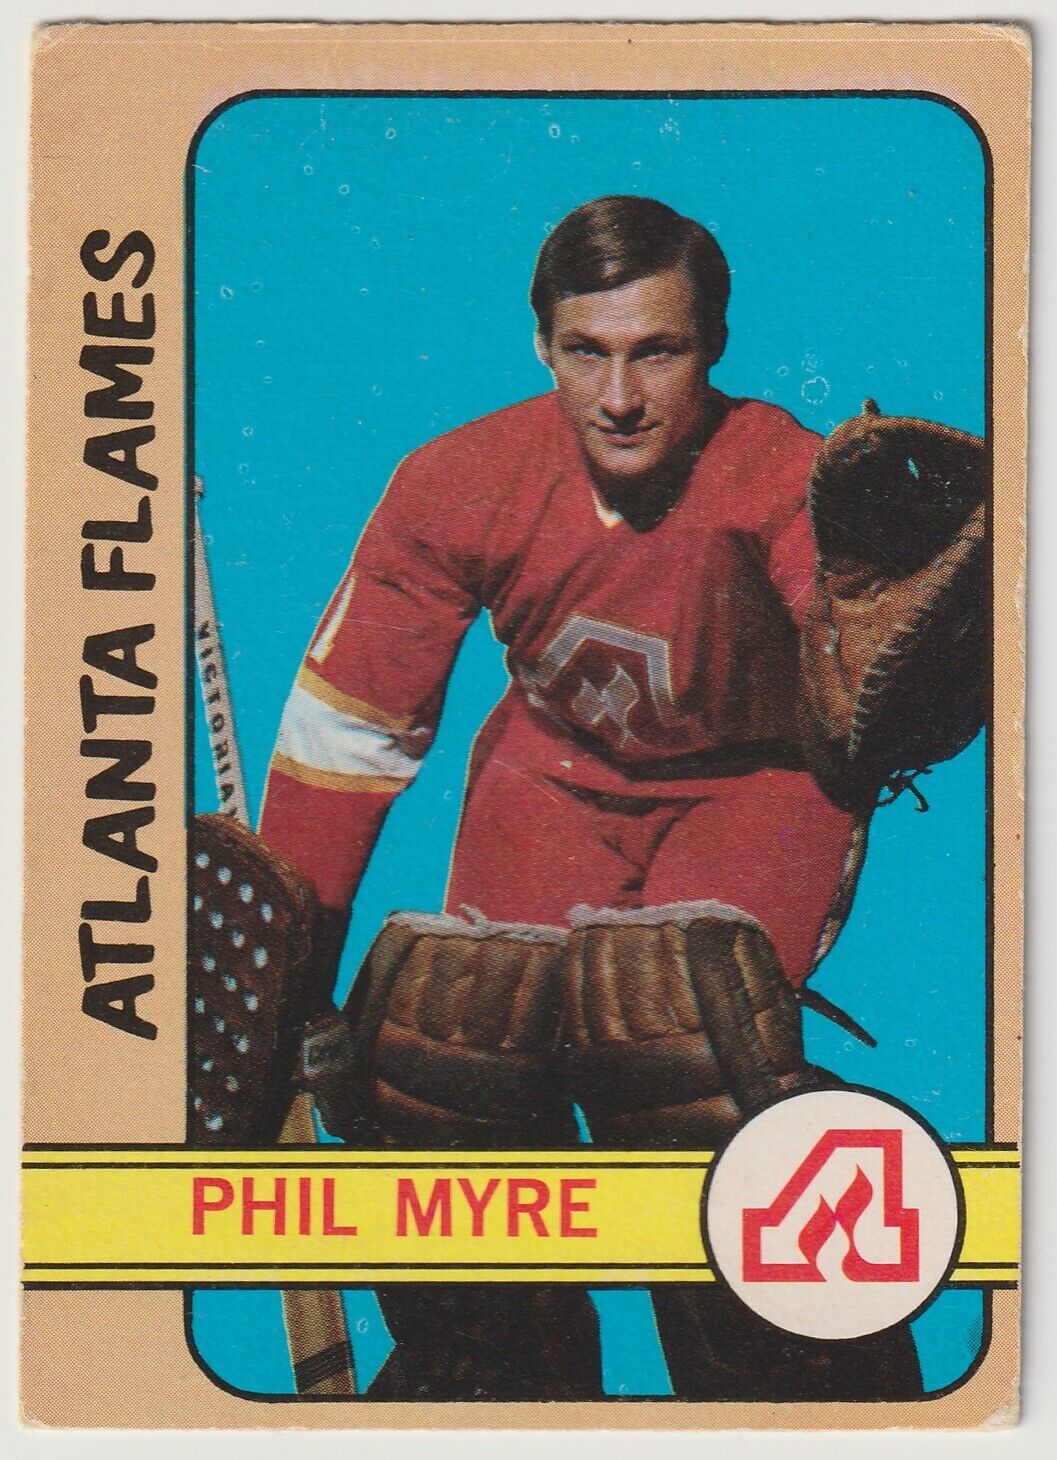 1972-73 OPC Phil Myre Rookie Card #43 Atlanta Flames. rookie card picture